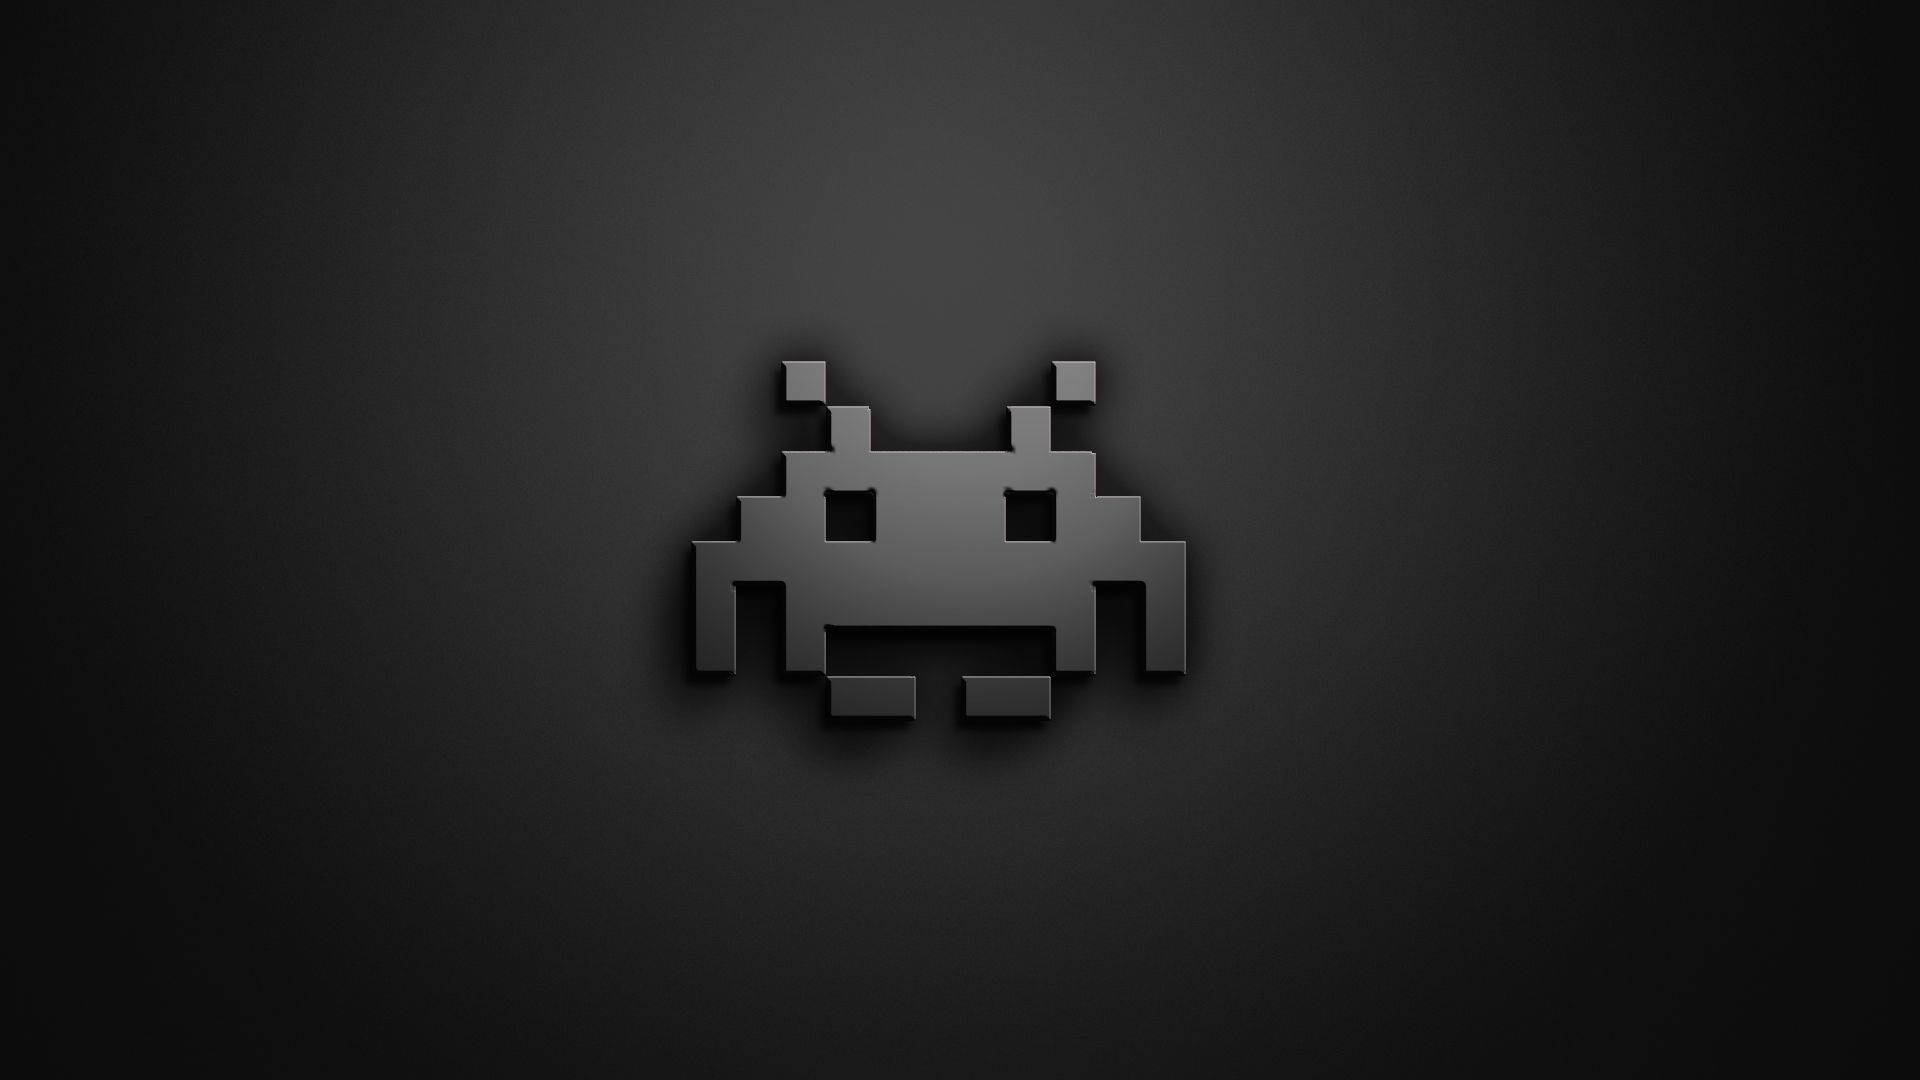 Download 1920 X 1080 Gaming Space Invaders Crab Icon Wallpaper | Wallpapers .com